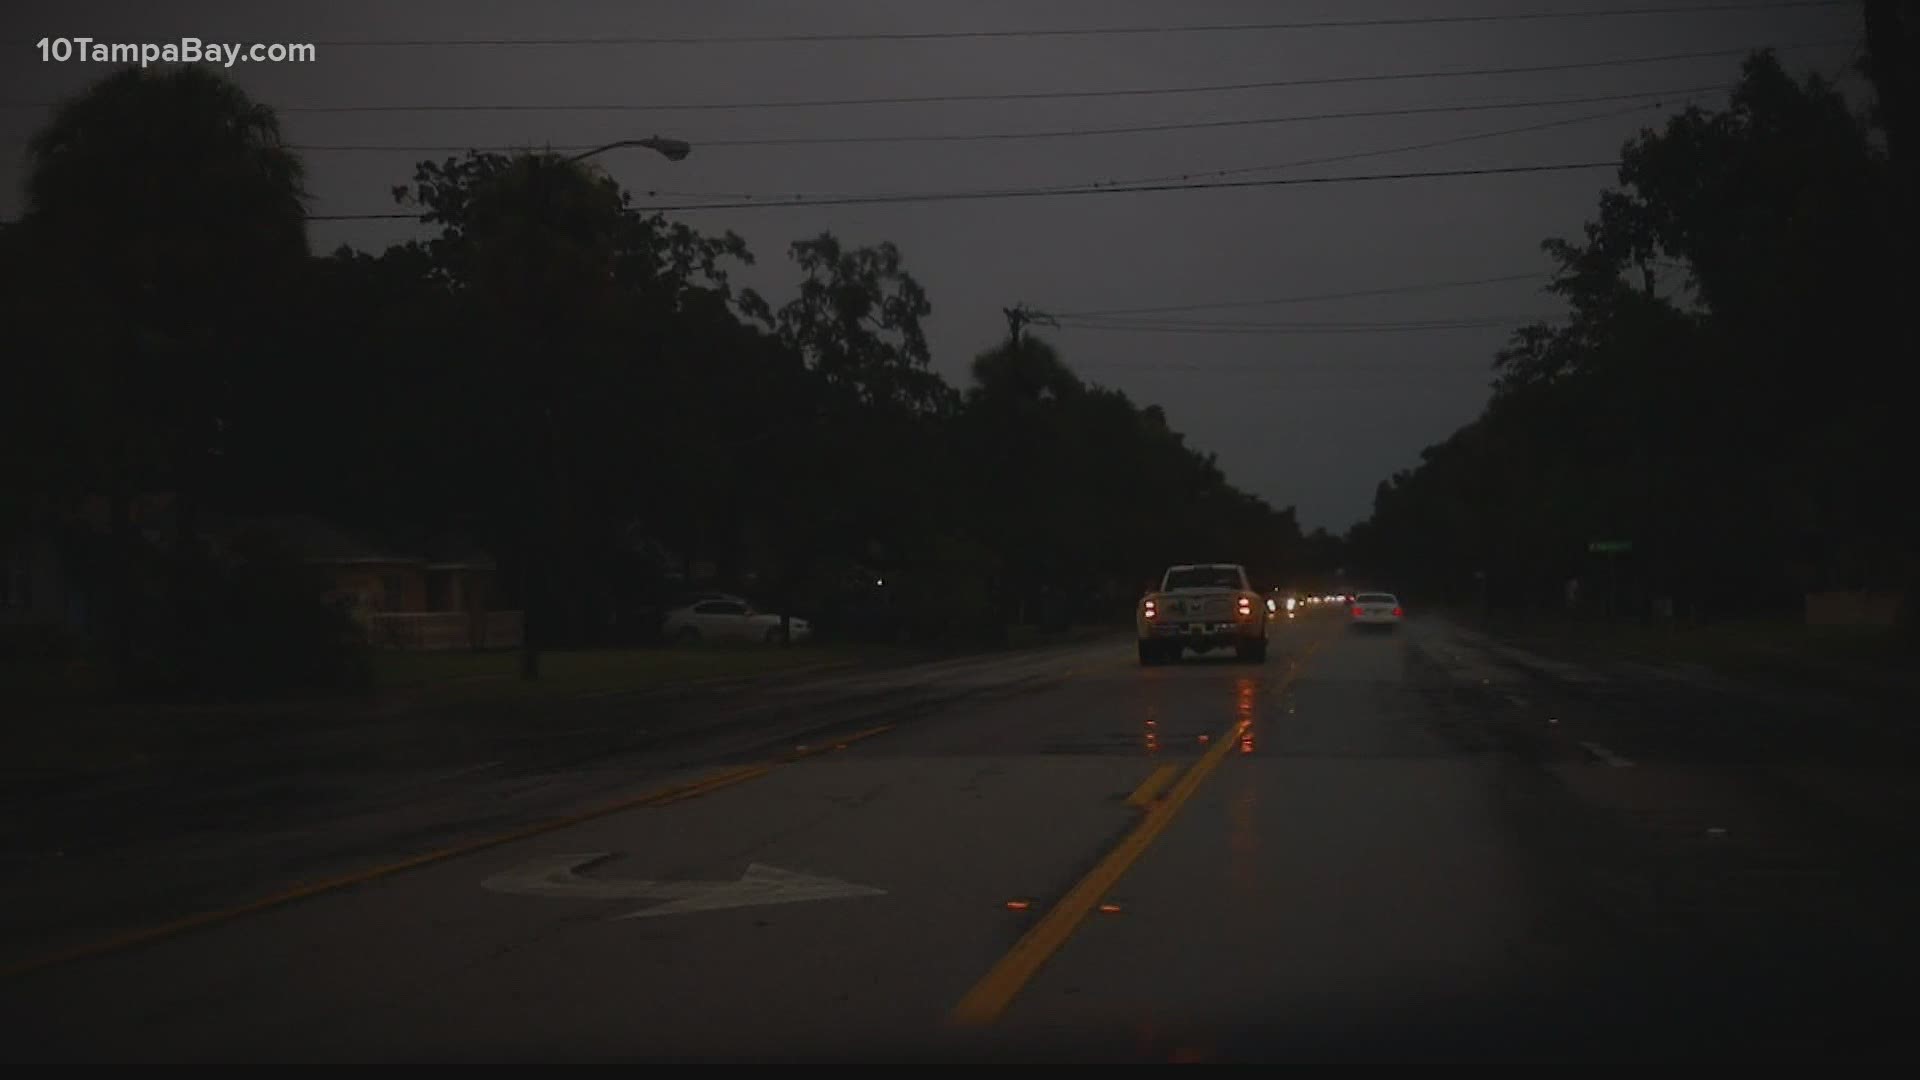 The law allows people in the state of Florida to use their hazard lights when experiencing poor driving conditions.